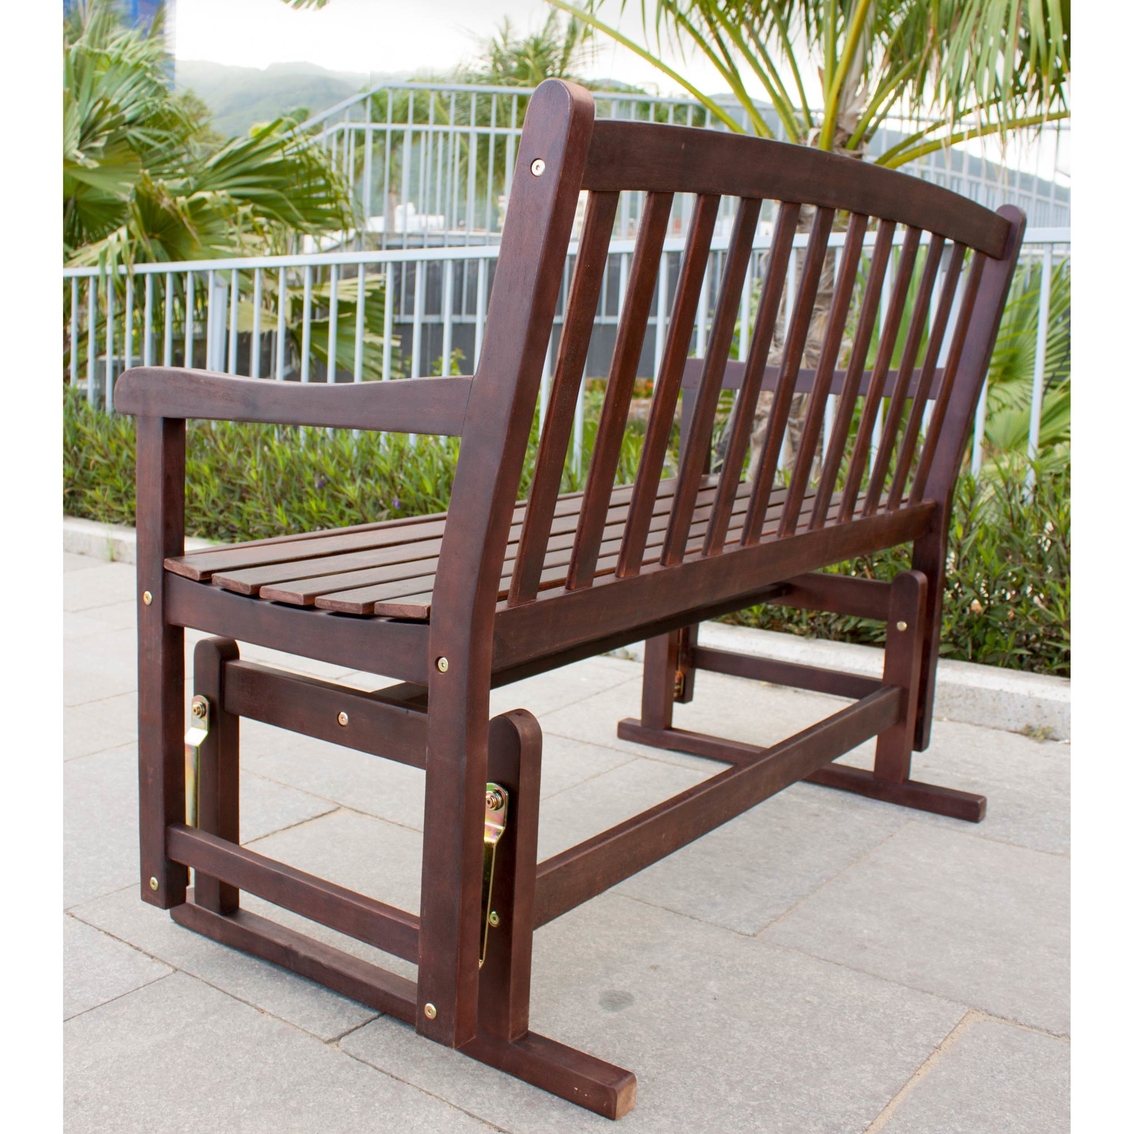 Merry Products Glider Bench - Image 6 of 8